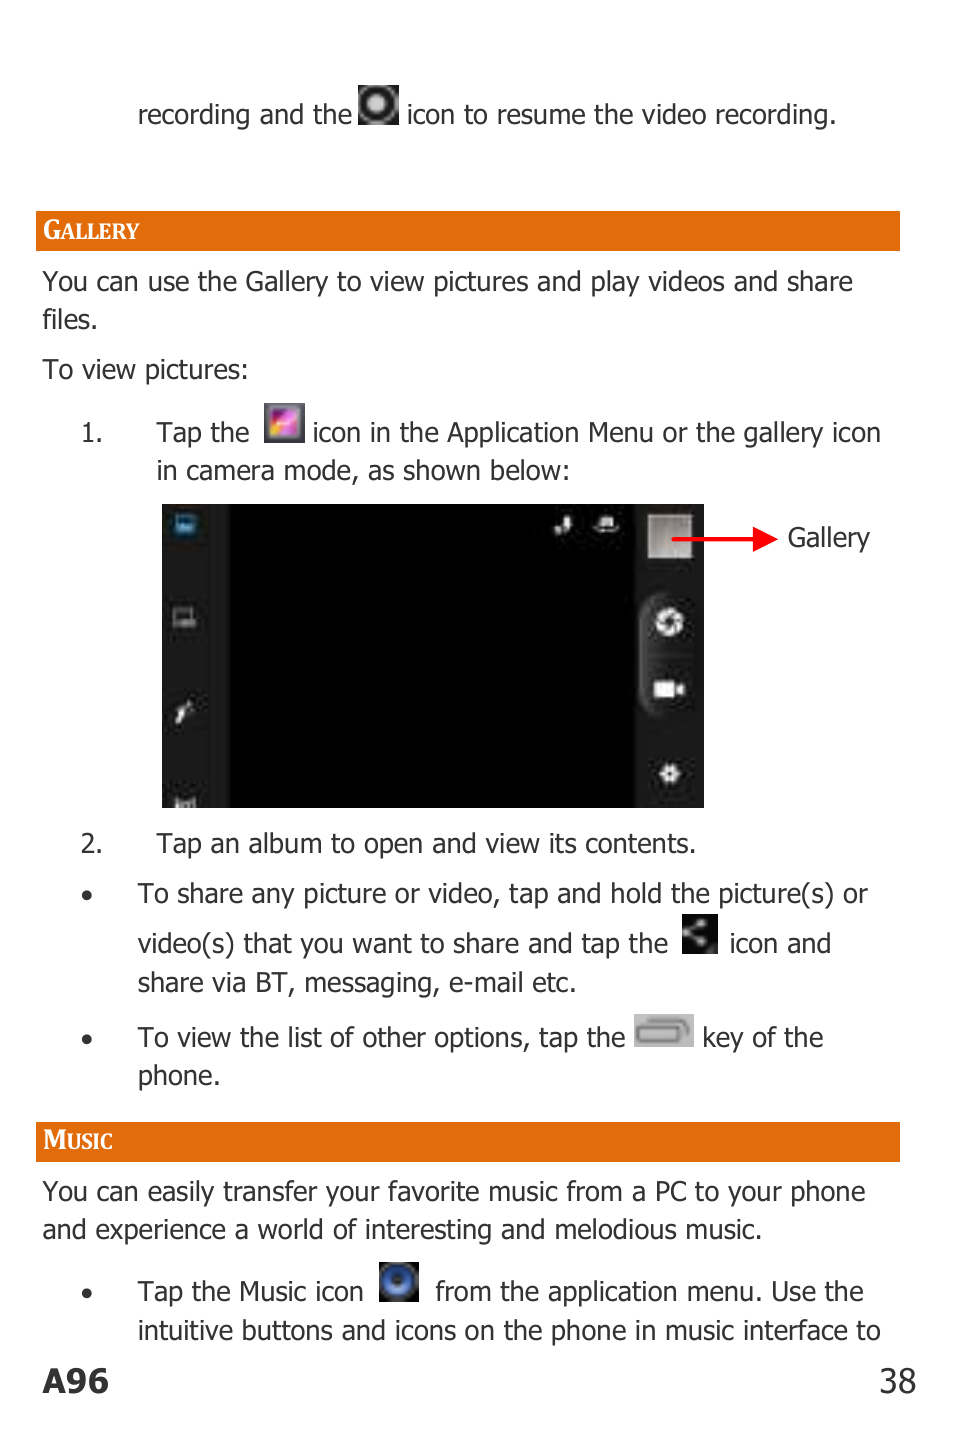 Allery, Usic, A96 38 | Micromax Canvas Power User Manual | Page 38 / 56